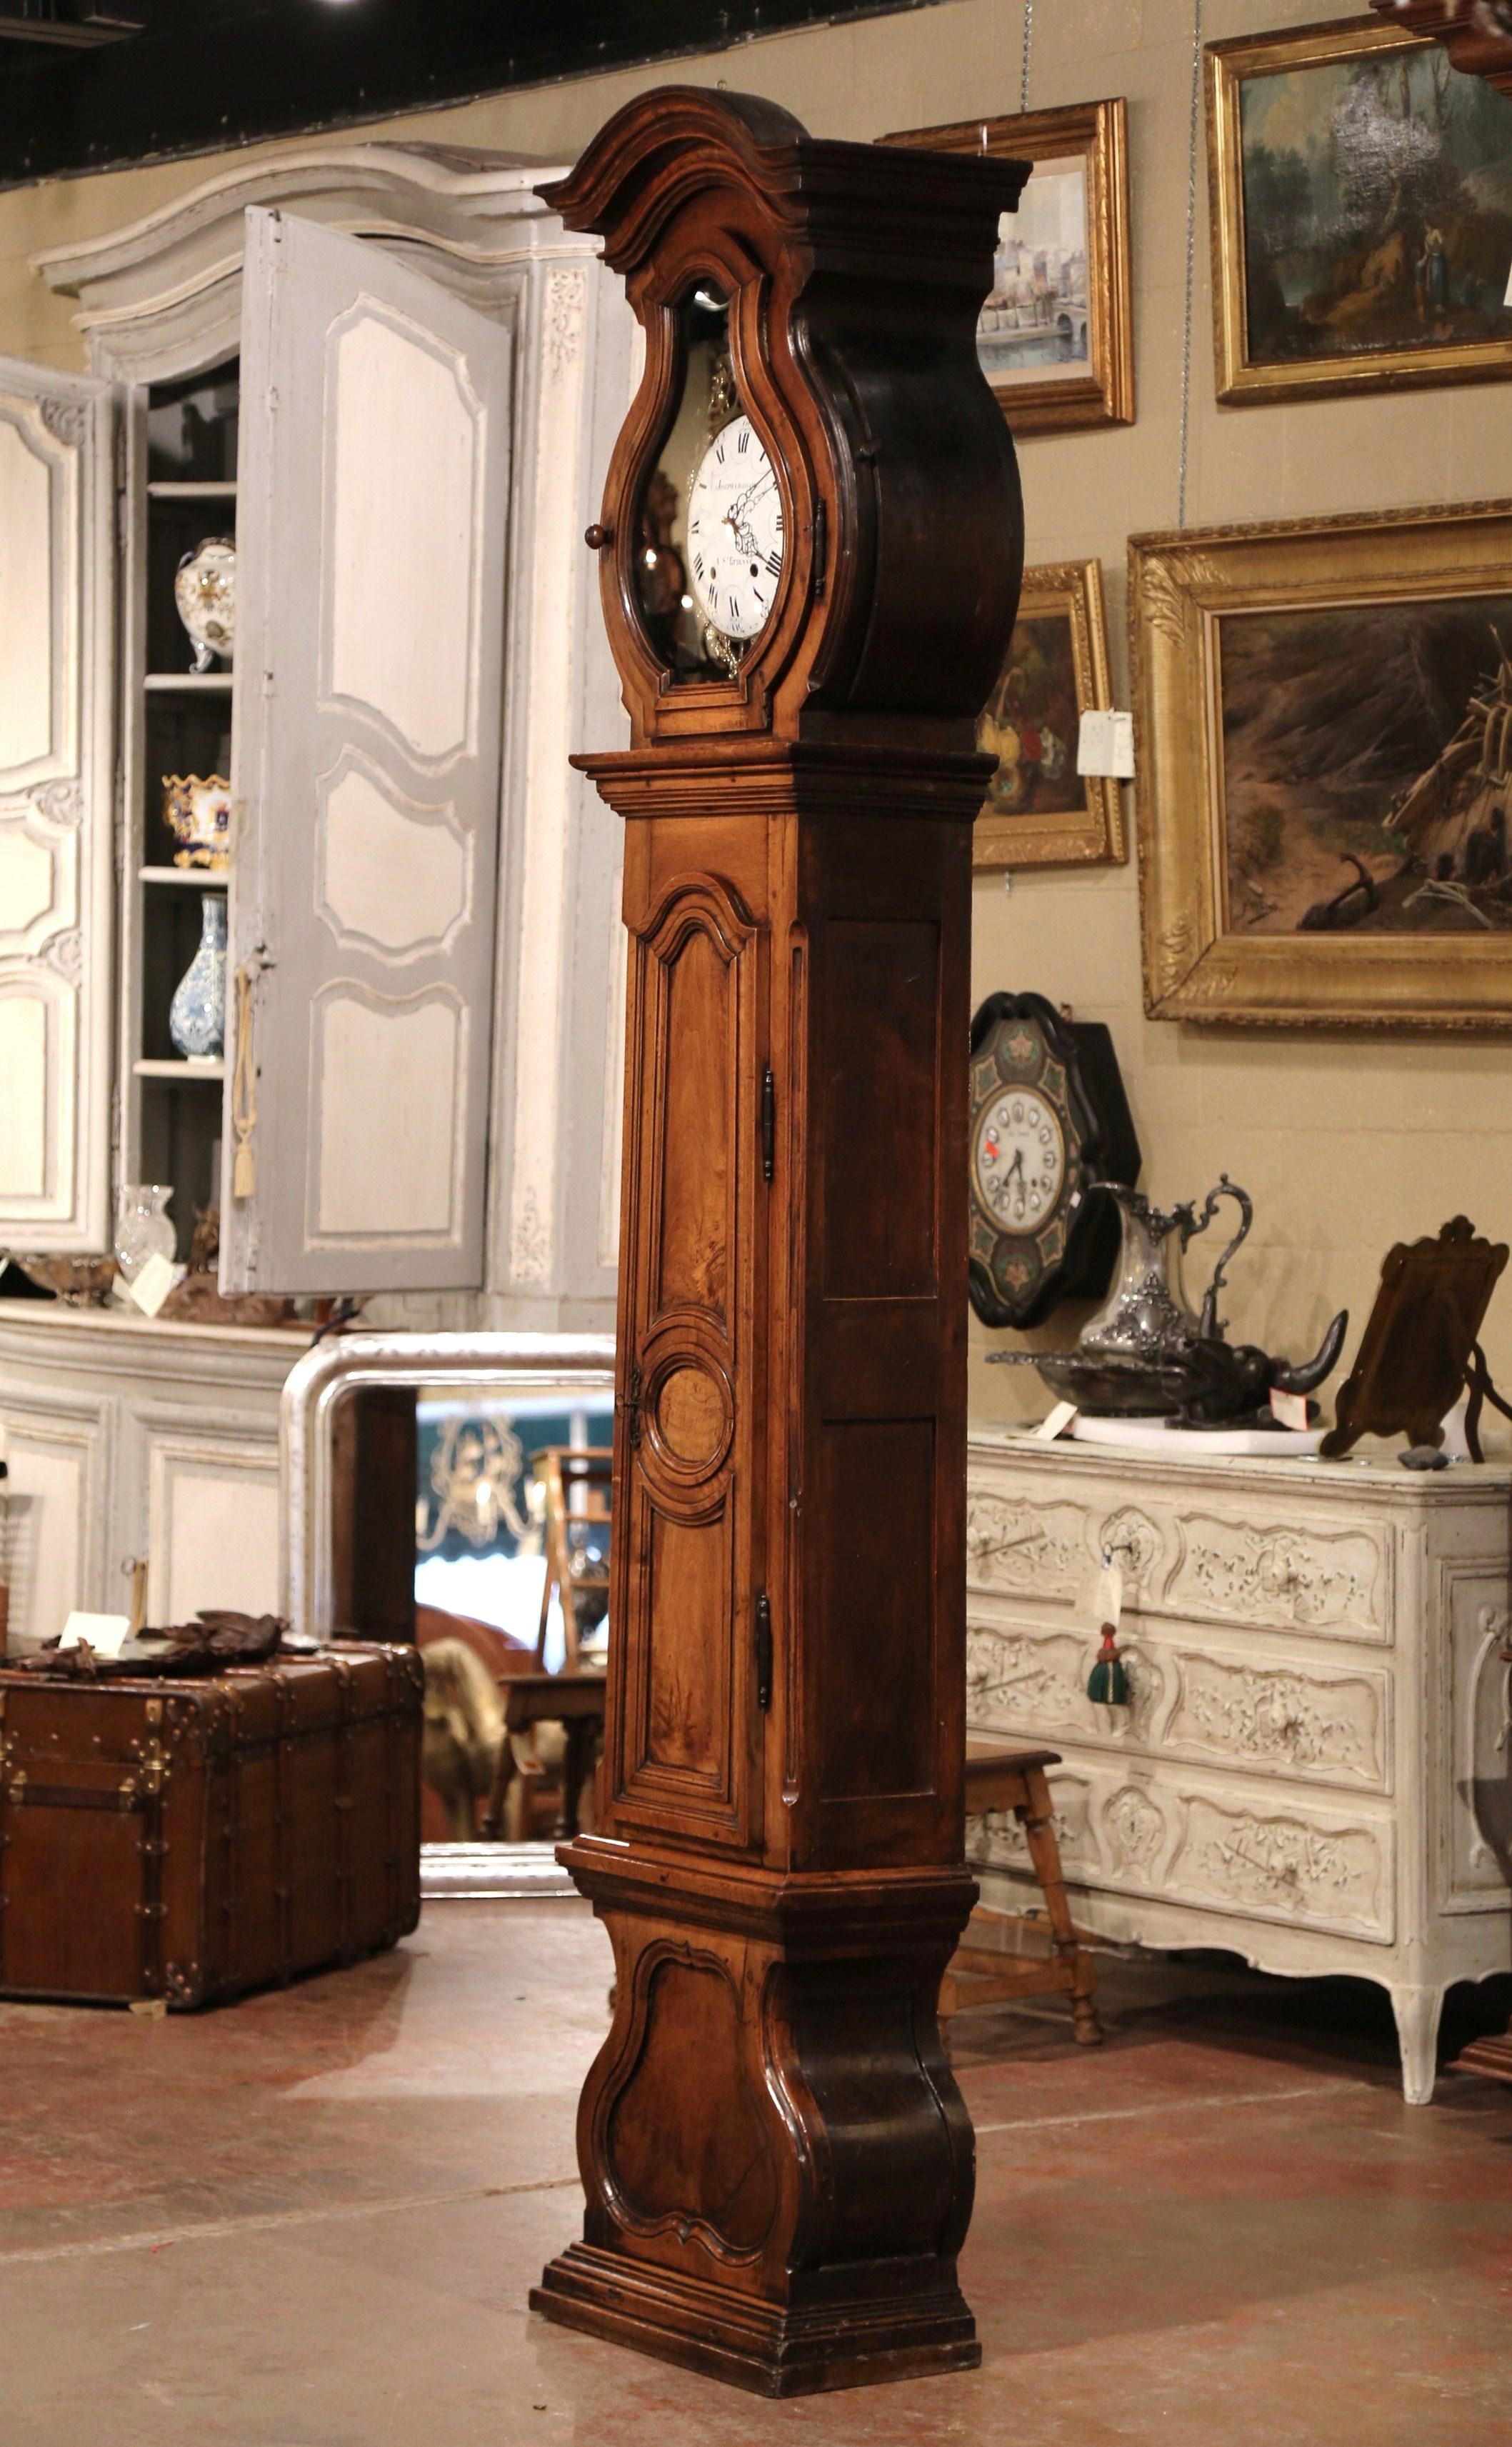 This elegant, antique long case clock was crafted in Lyon, France, circa 1760. The fruitwood grandfather clock built in three sections has beautiful lines including an elegant bonnet top at the pediment, a long center door with raised panel, and a